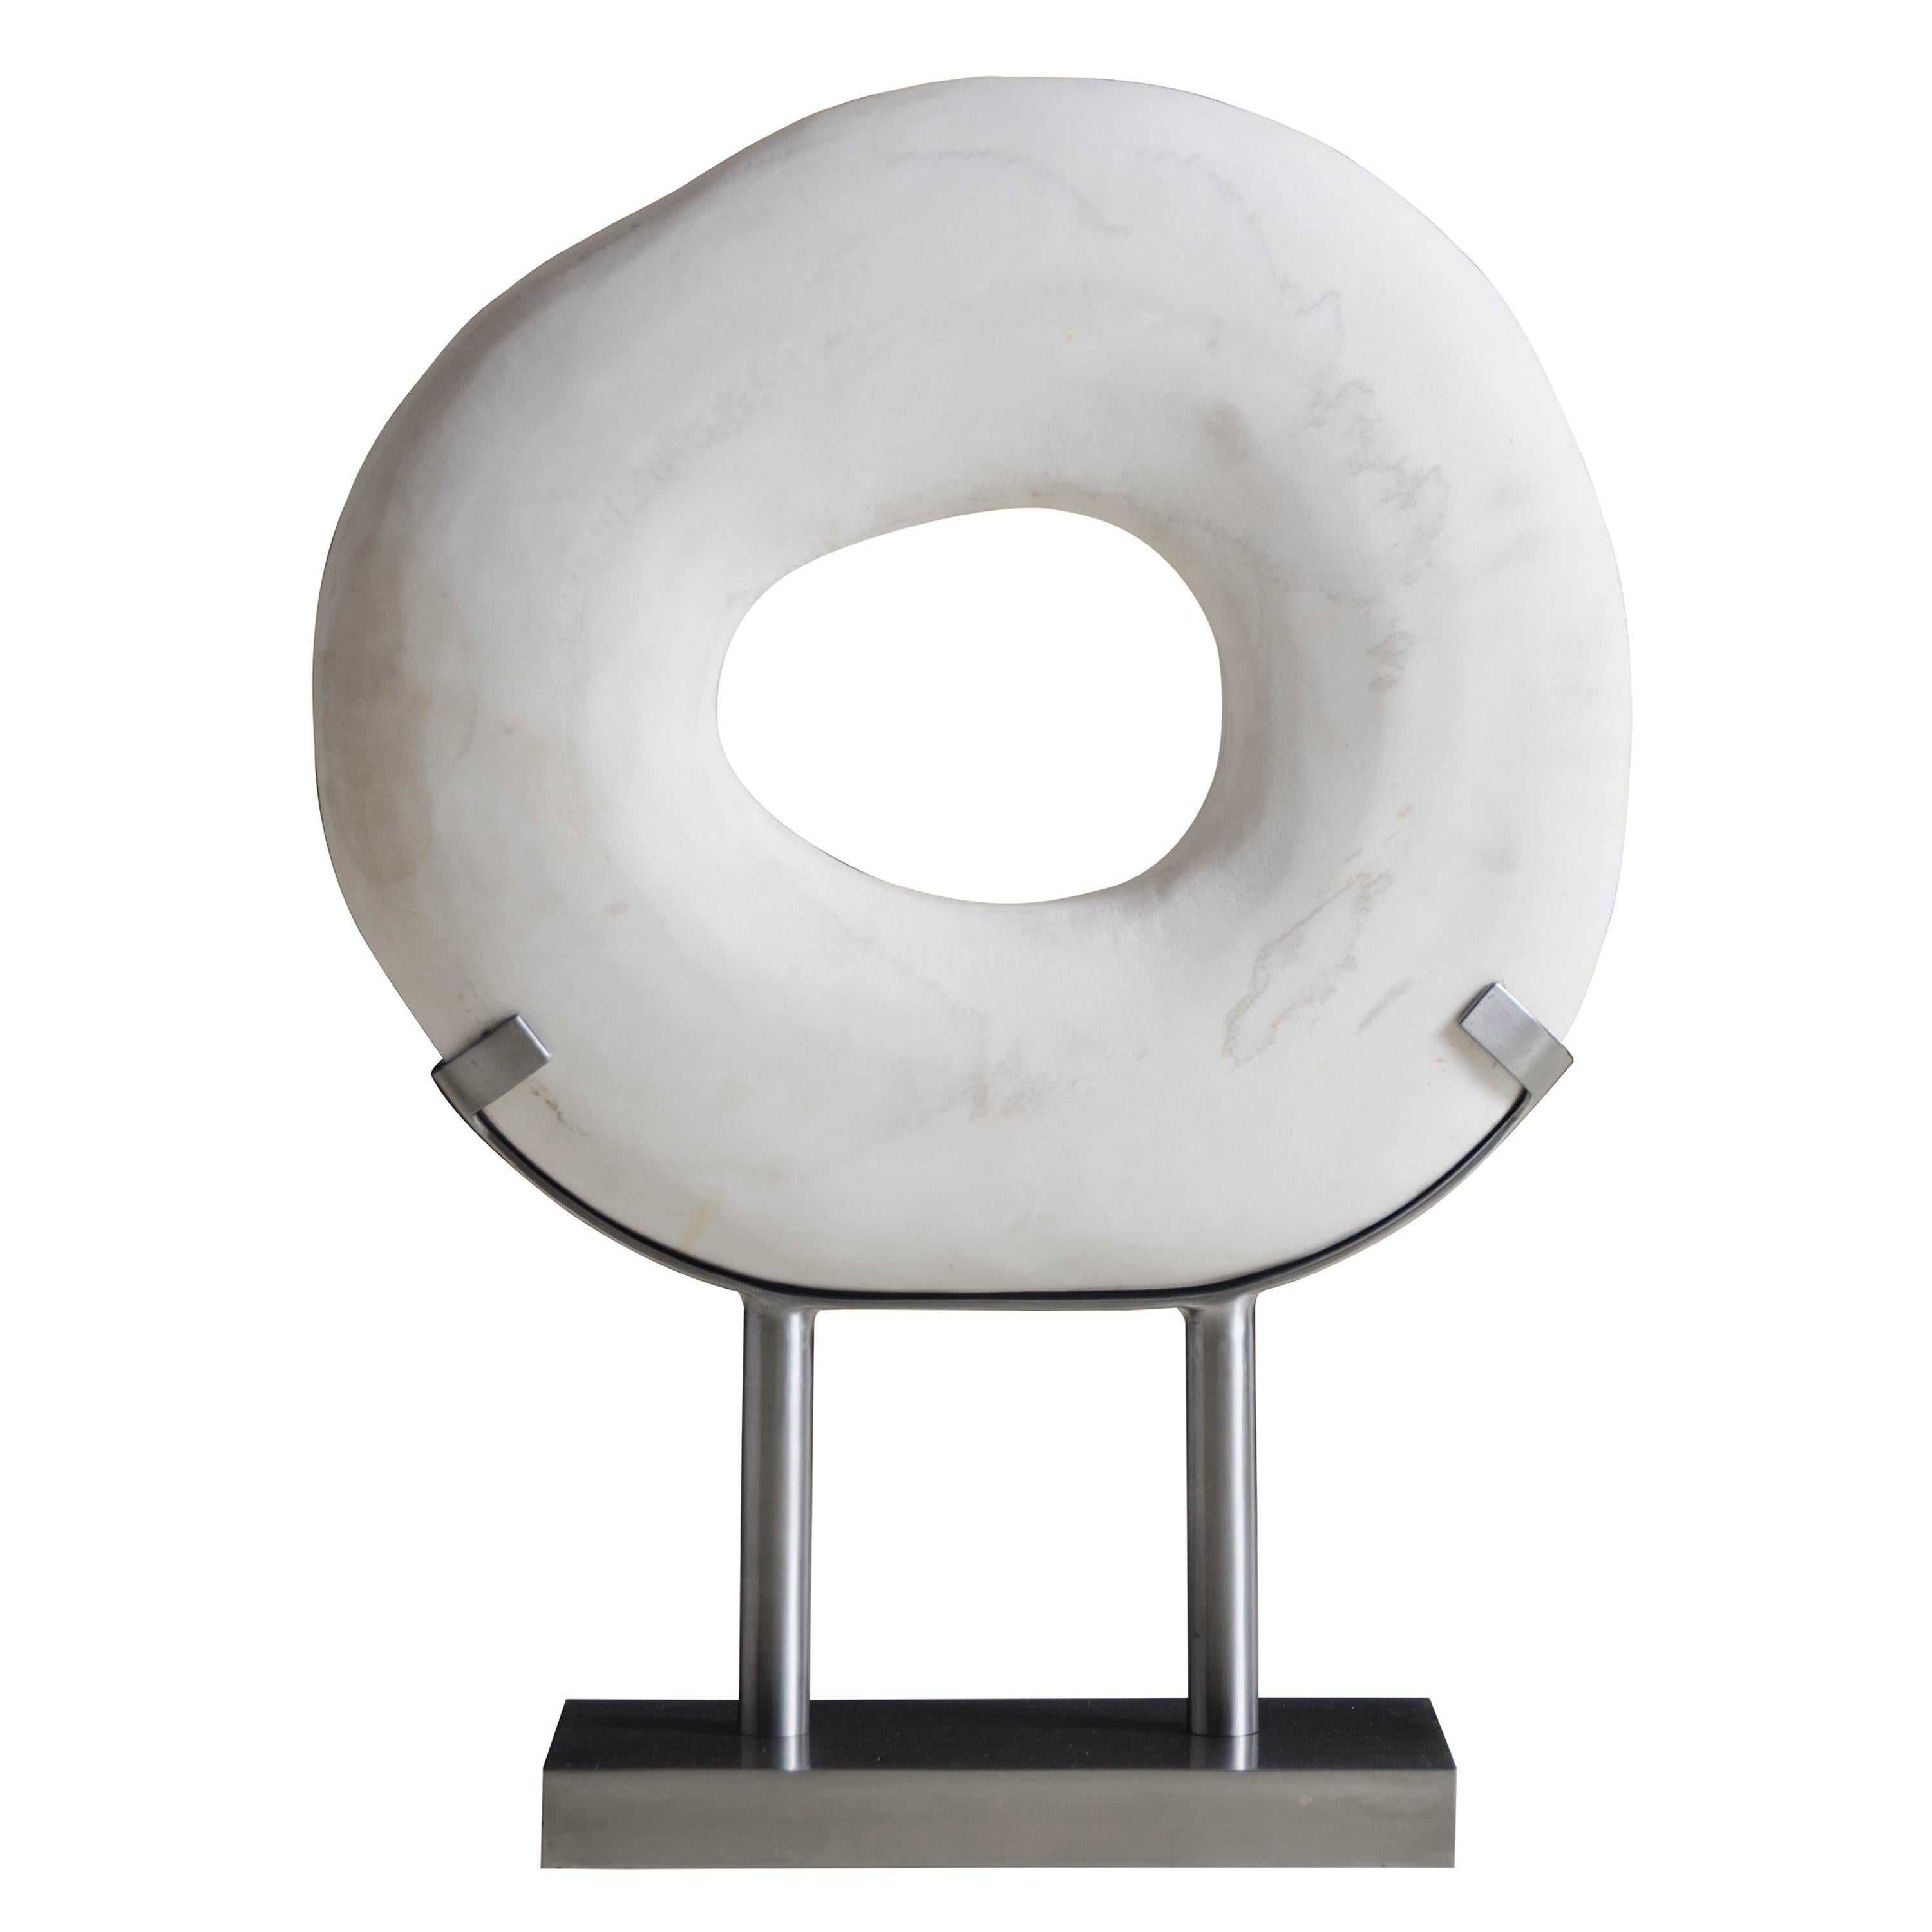 Zong Bi Sculpture in Han Bai Yu Stone on Steel Stand by Robert Kuo, Limited Ed